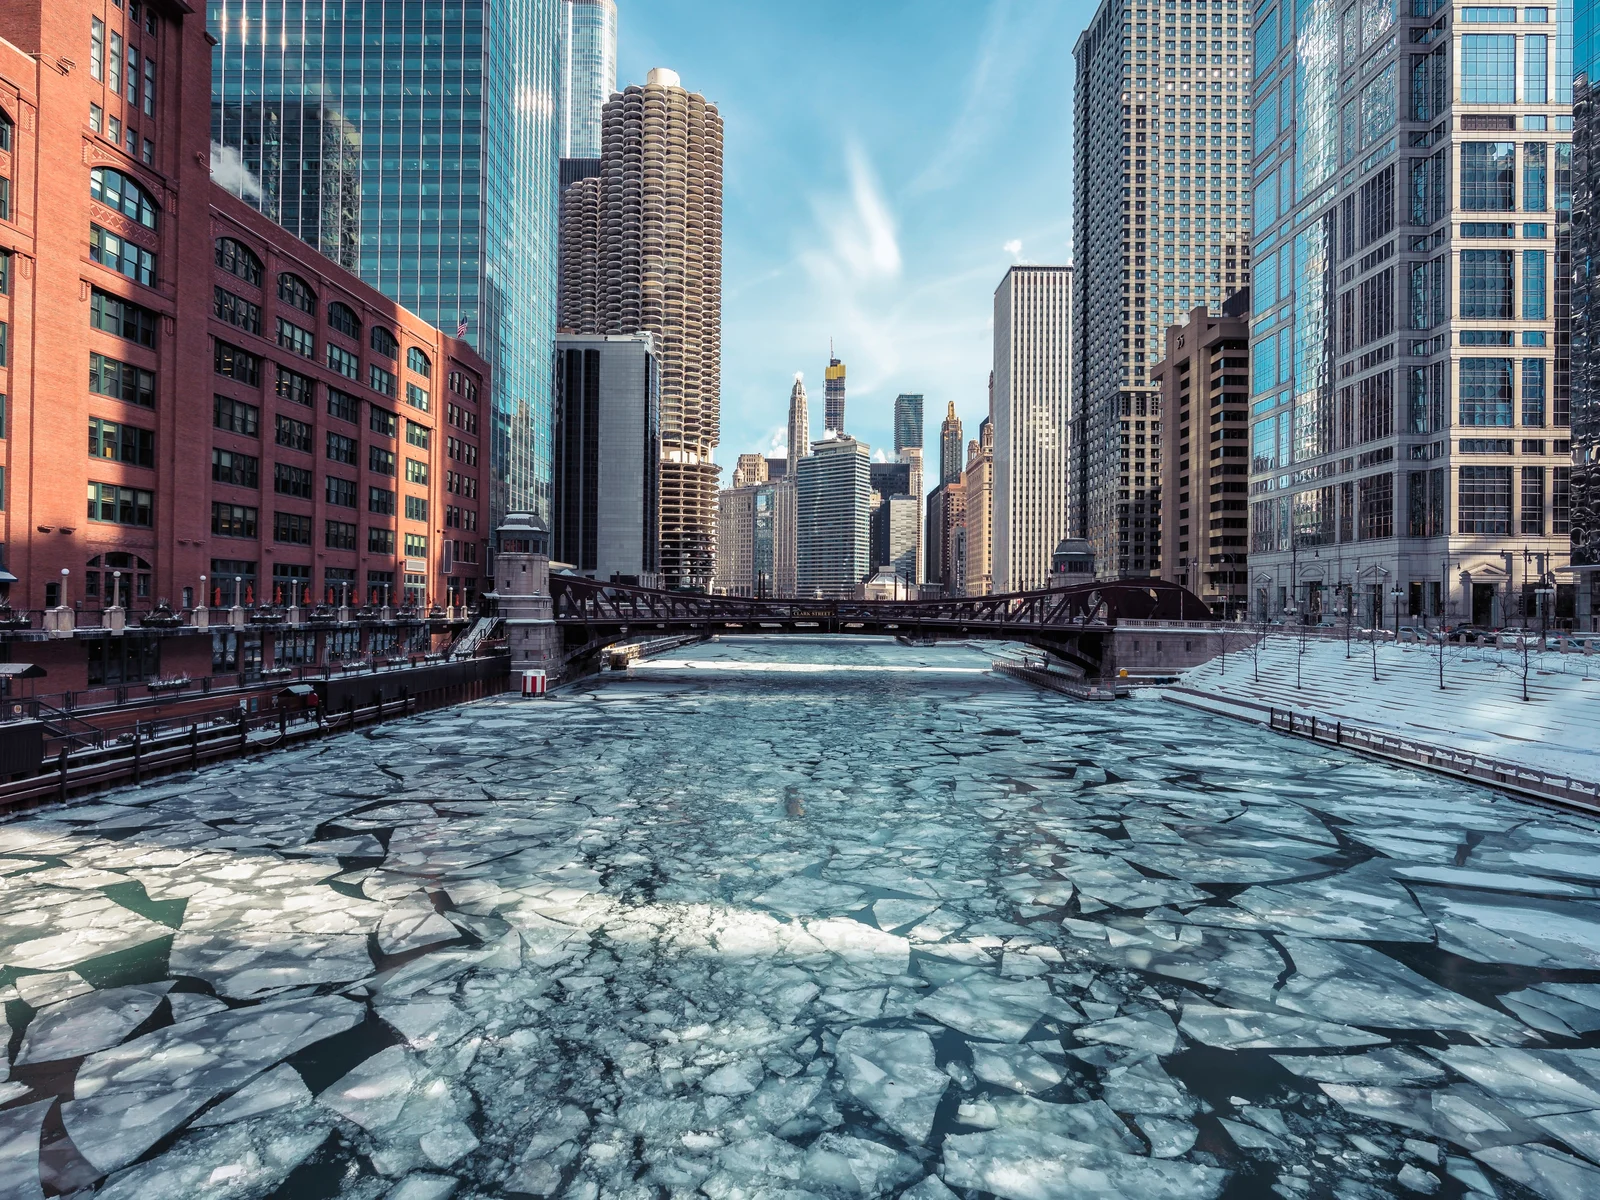 Ice on the Chicago river pictured during February, the cheapest time to visit